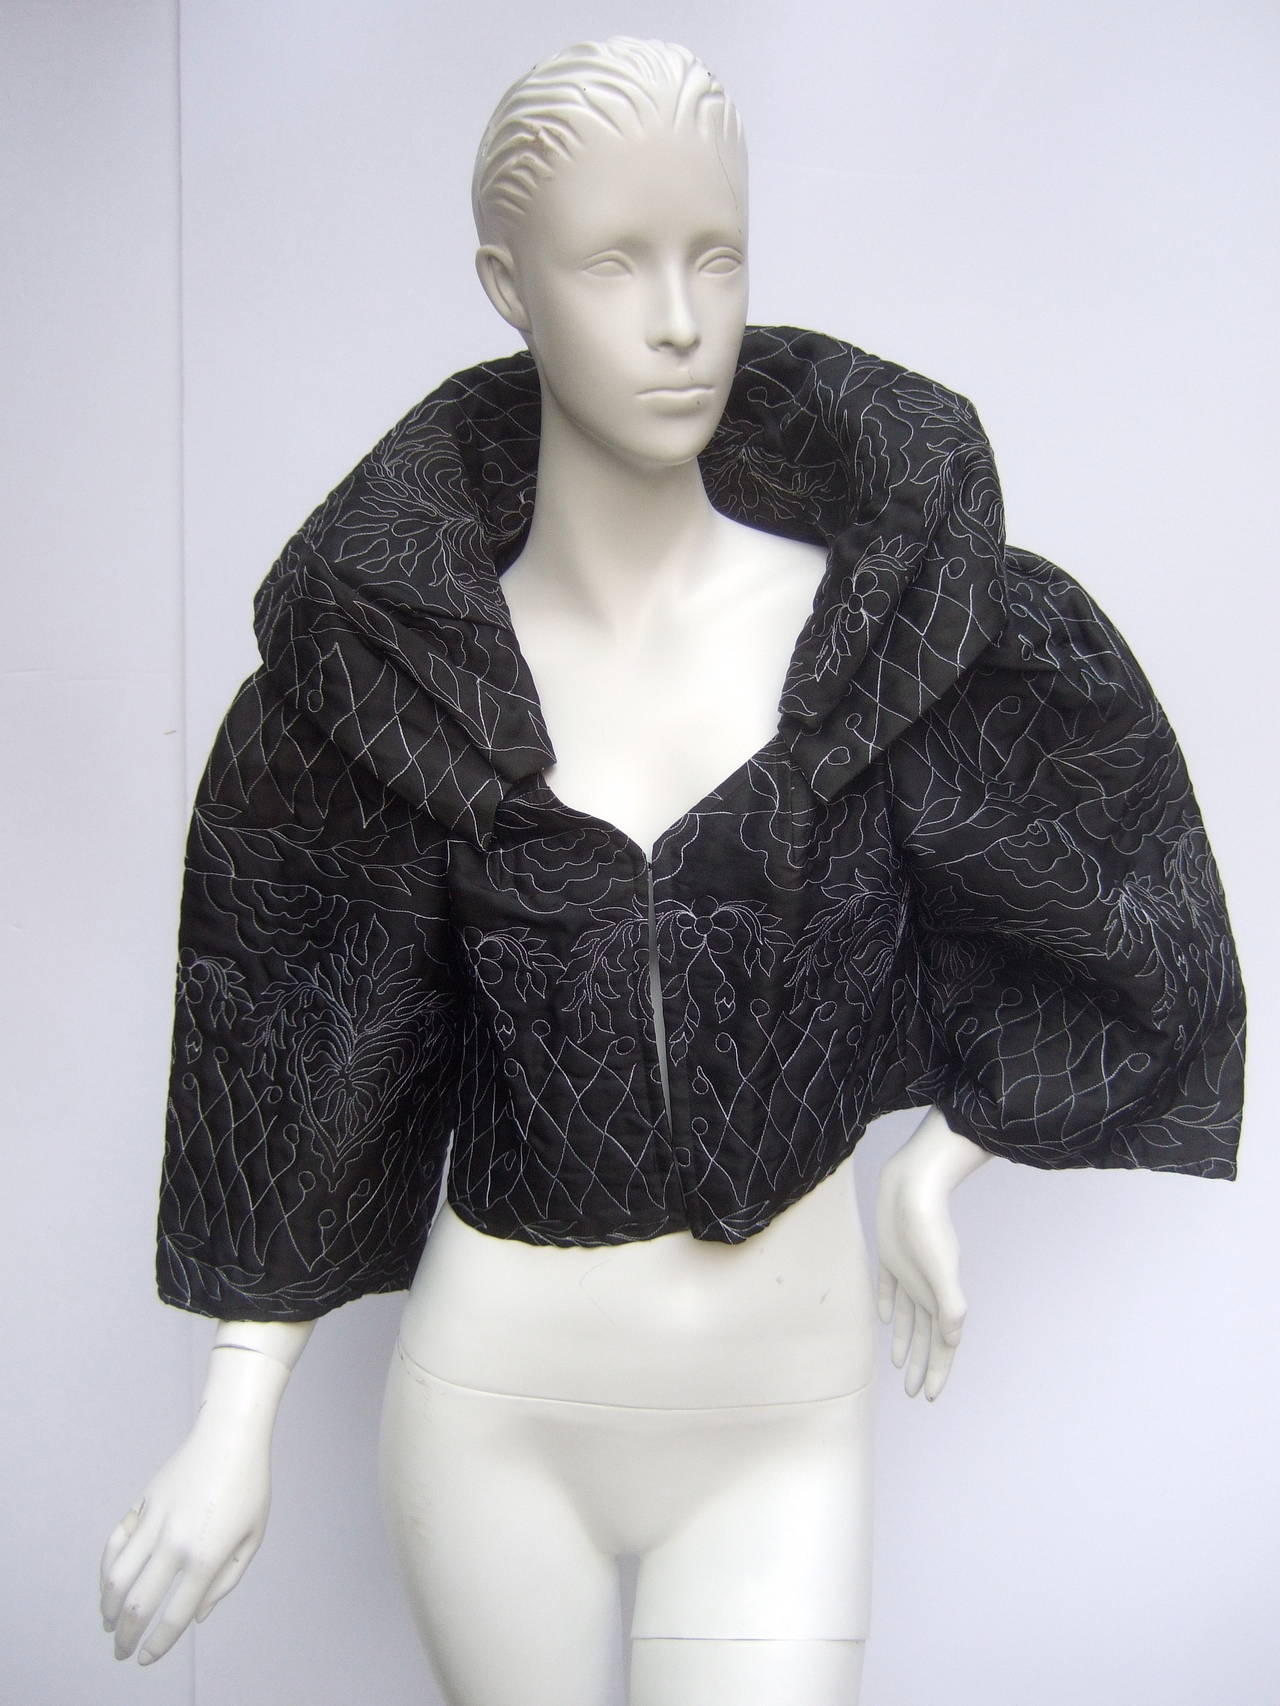 ***RESERVED SALE PENDING FOR IAN HYLTON***
Christian Lacroix Black embroidered quilted cropped bolero
The stylish high fashion jacked is embellished with intricate floral designs 
with subtle hearts. The white embroidery illuminates against the